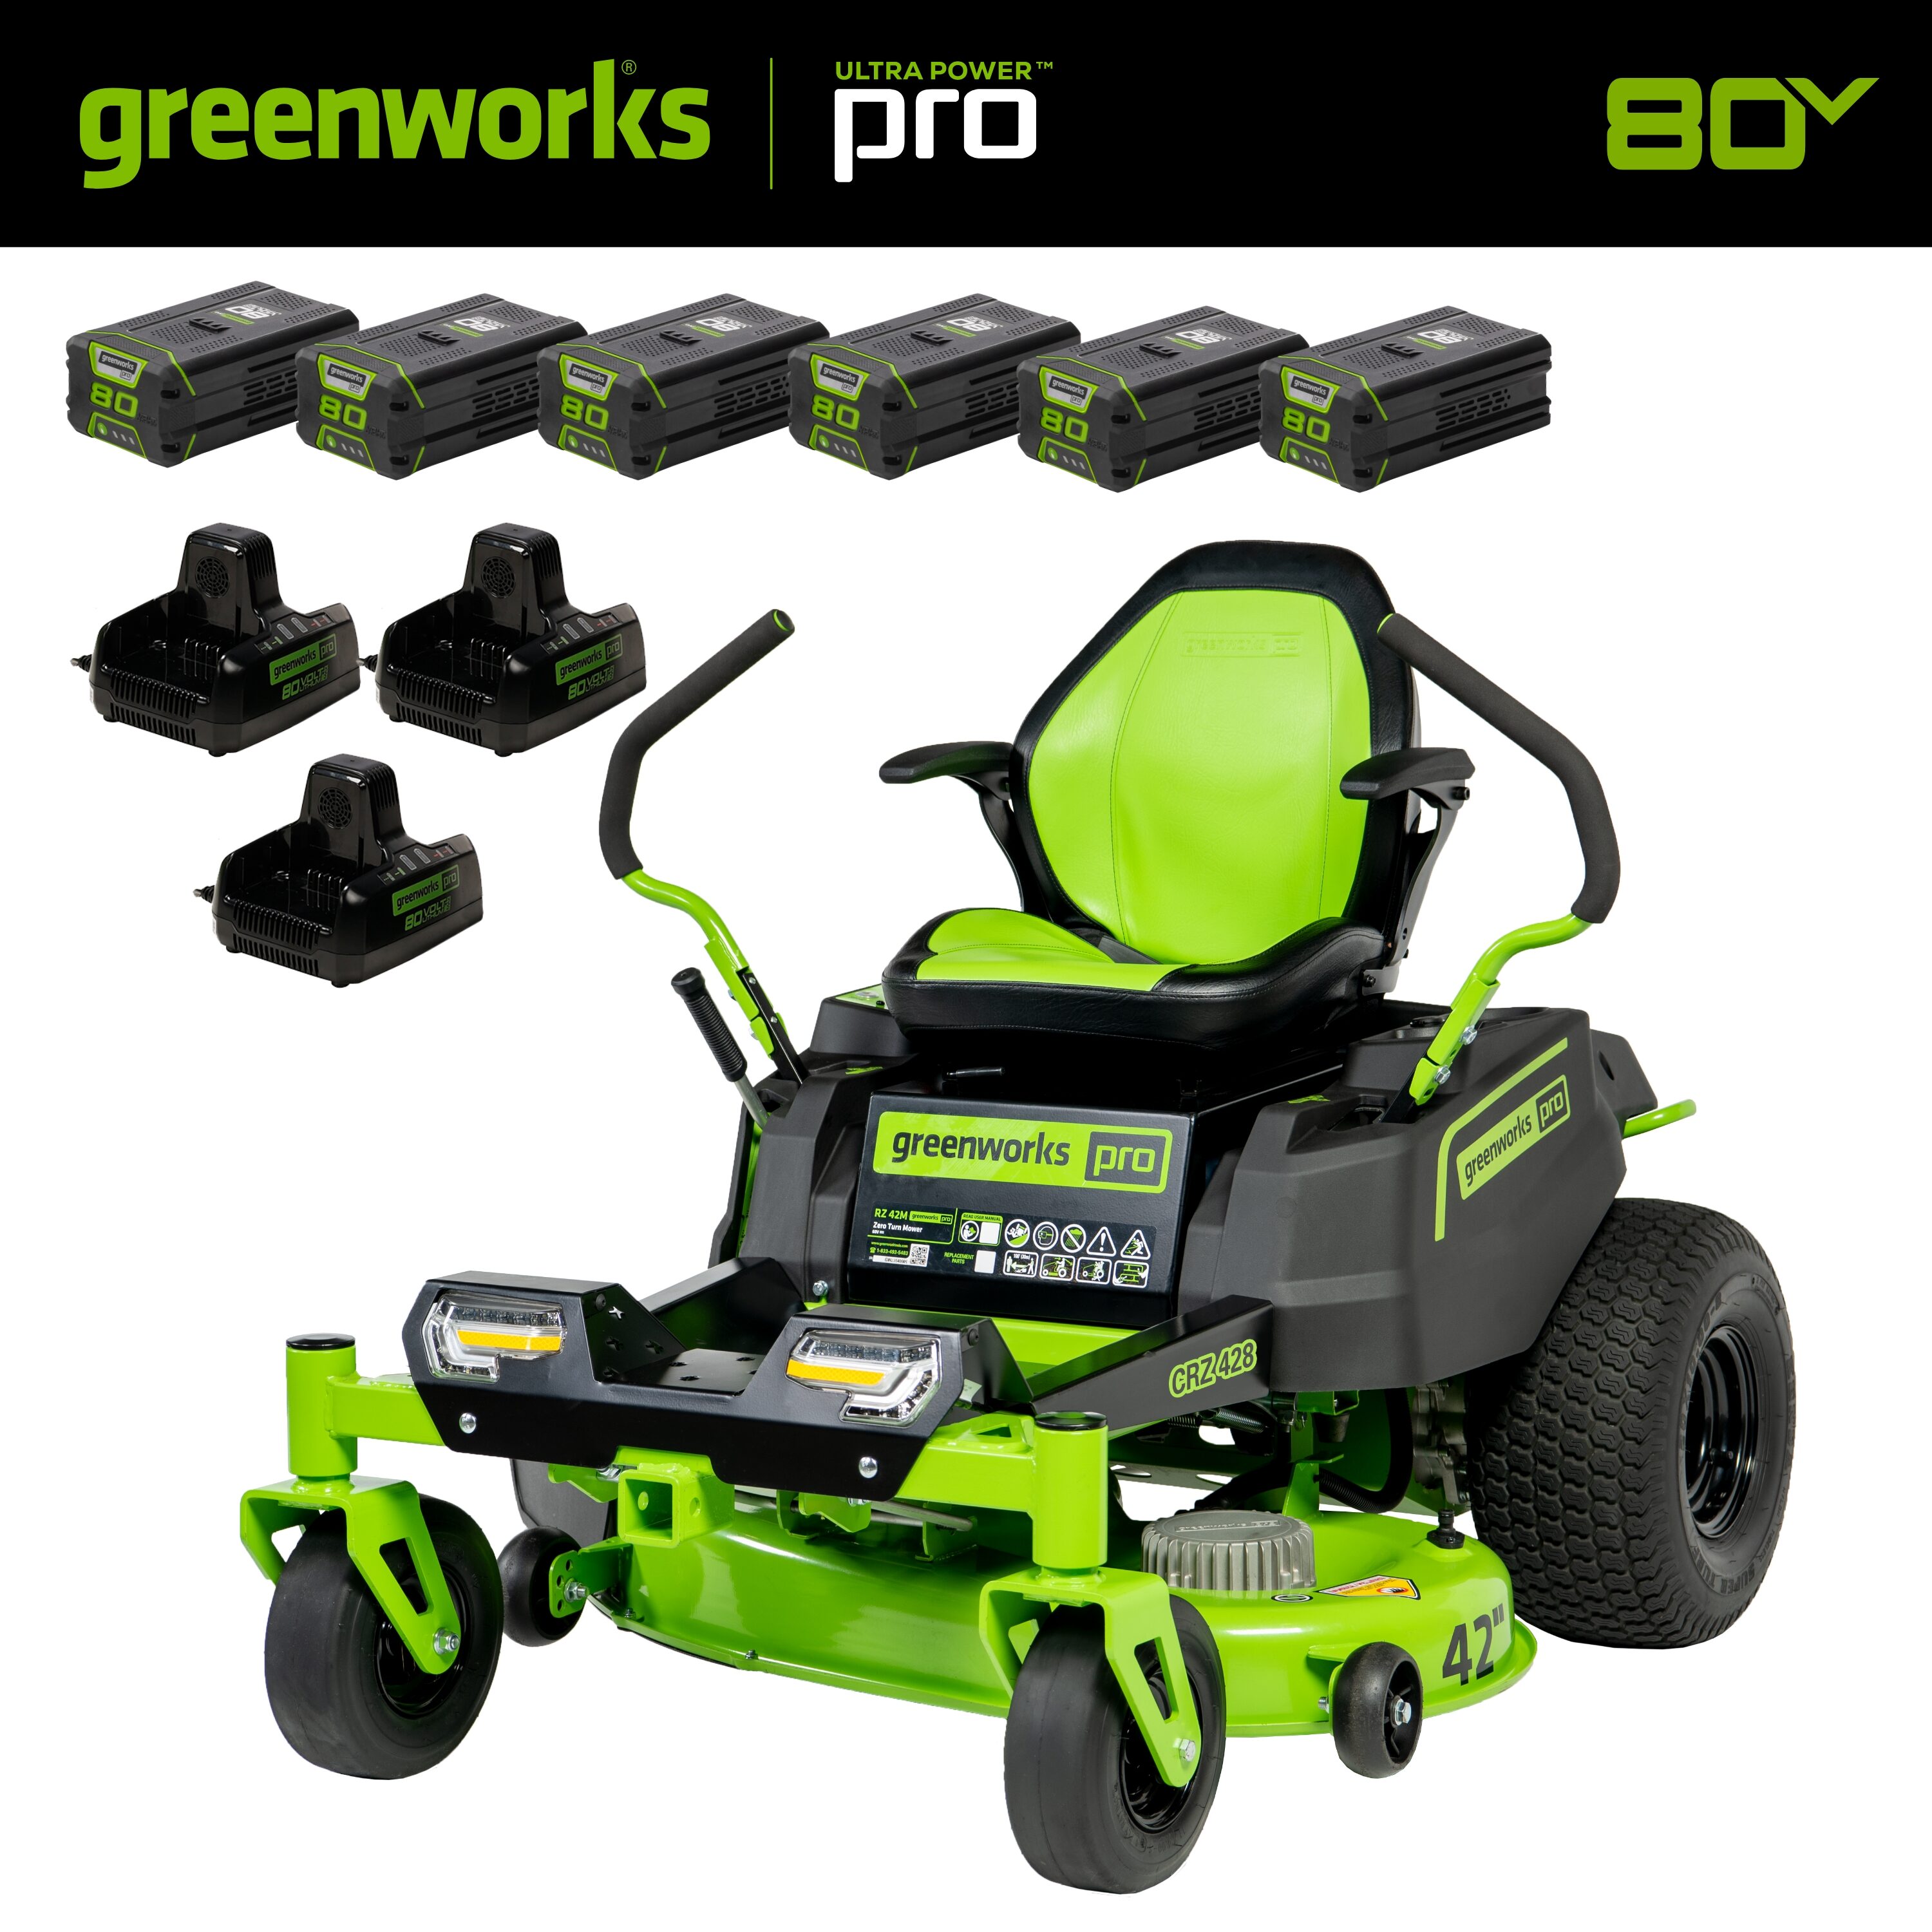 HD Switch - Black - Riding Lawn Mower - Garden Tractor - Seat Cushion Vinyl  Repair Kit - Extra Tough - Keeps Water Out!